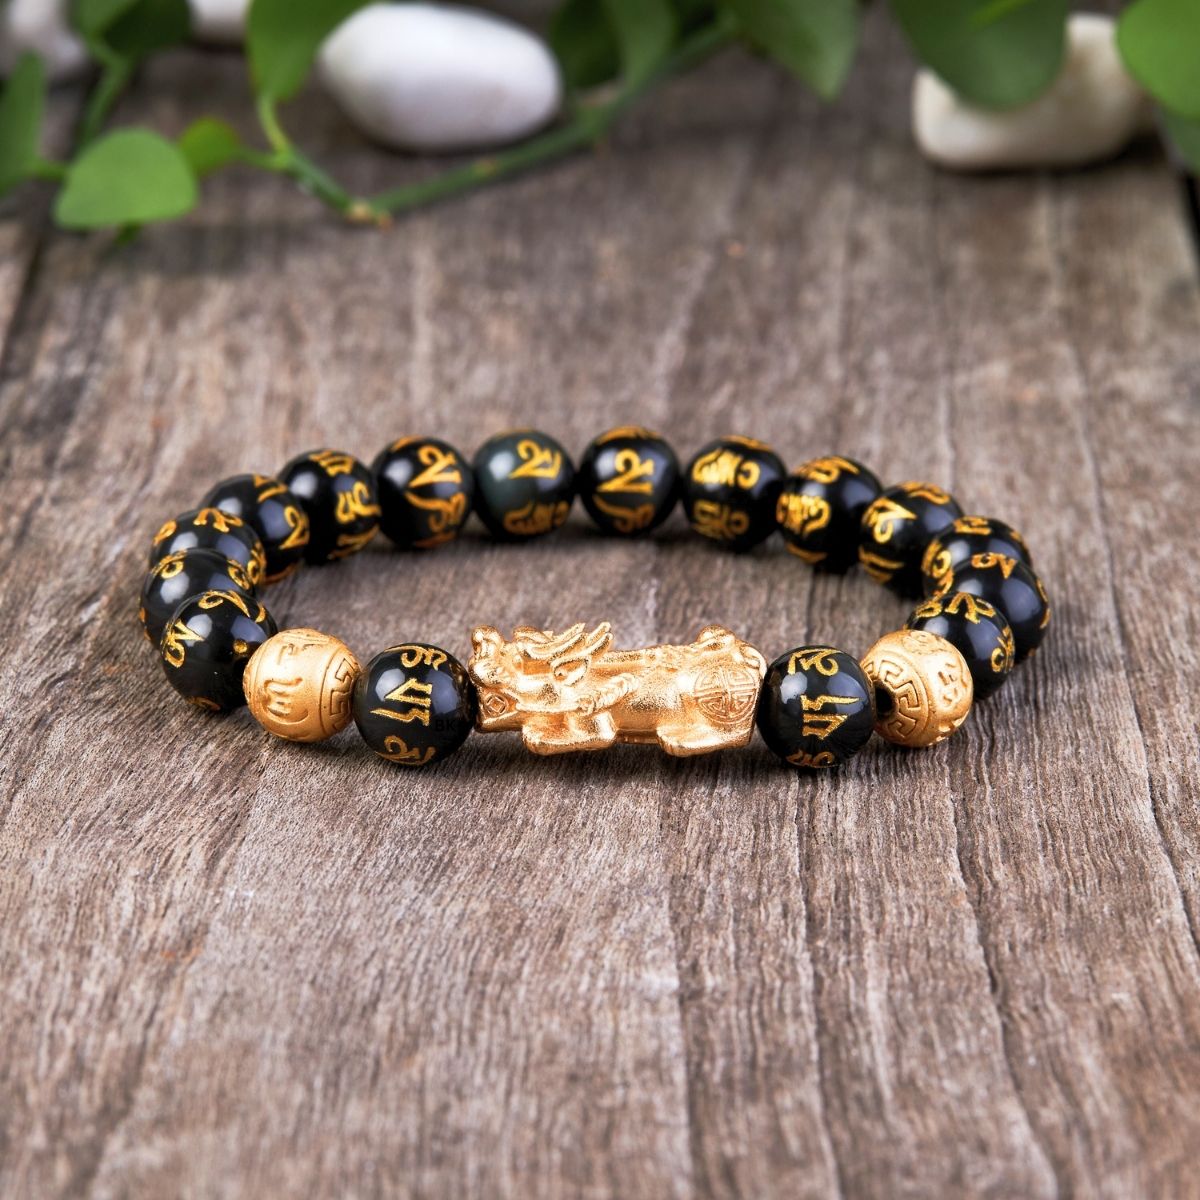 Feng Shui Good Luck Chinese Bracelet Lucky Charm Unisex Red Color Pixiu  Jewelry For Wealth And Health, Gold And Black Accents Perfect Gift For Men  And Women From Nataliearth, $10.78 | DHgate.Com